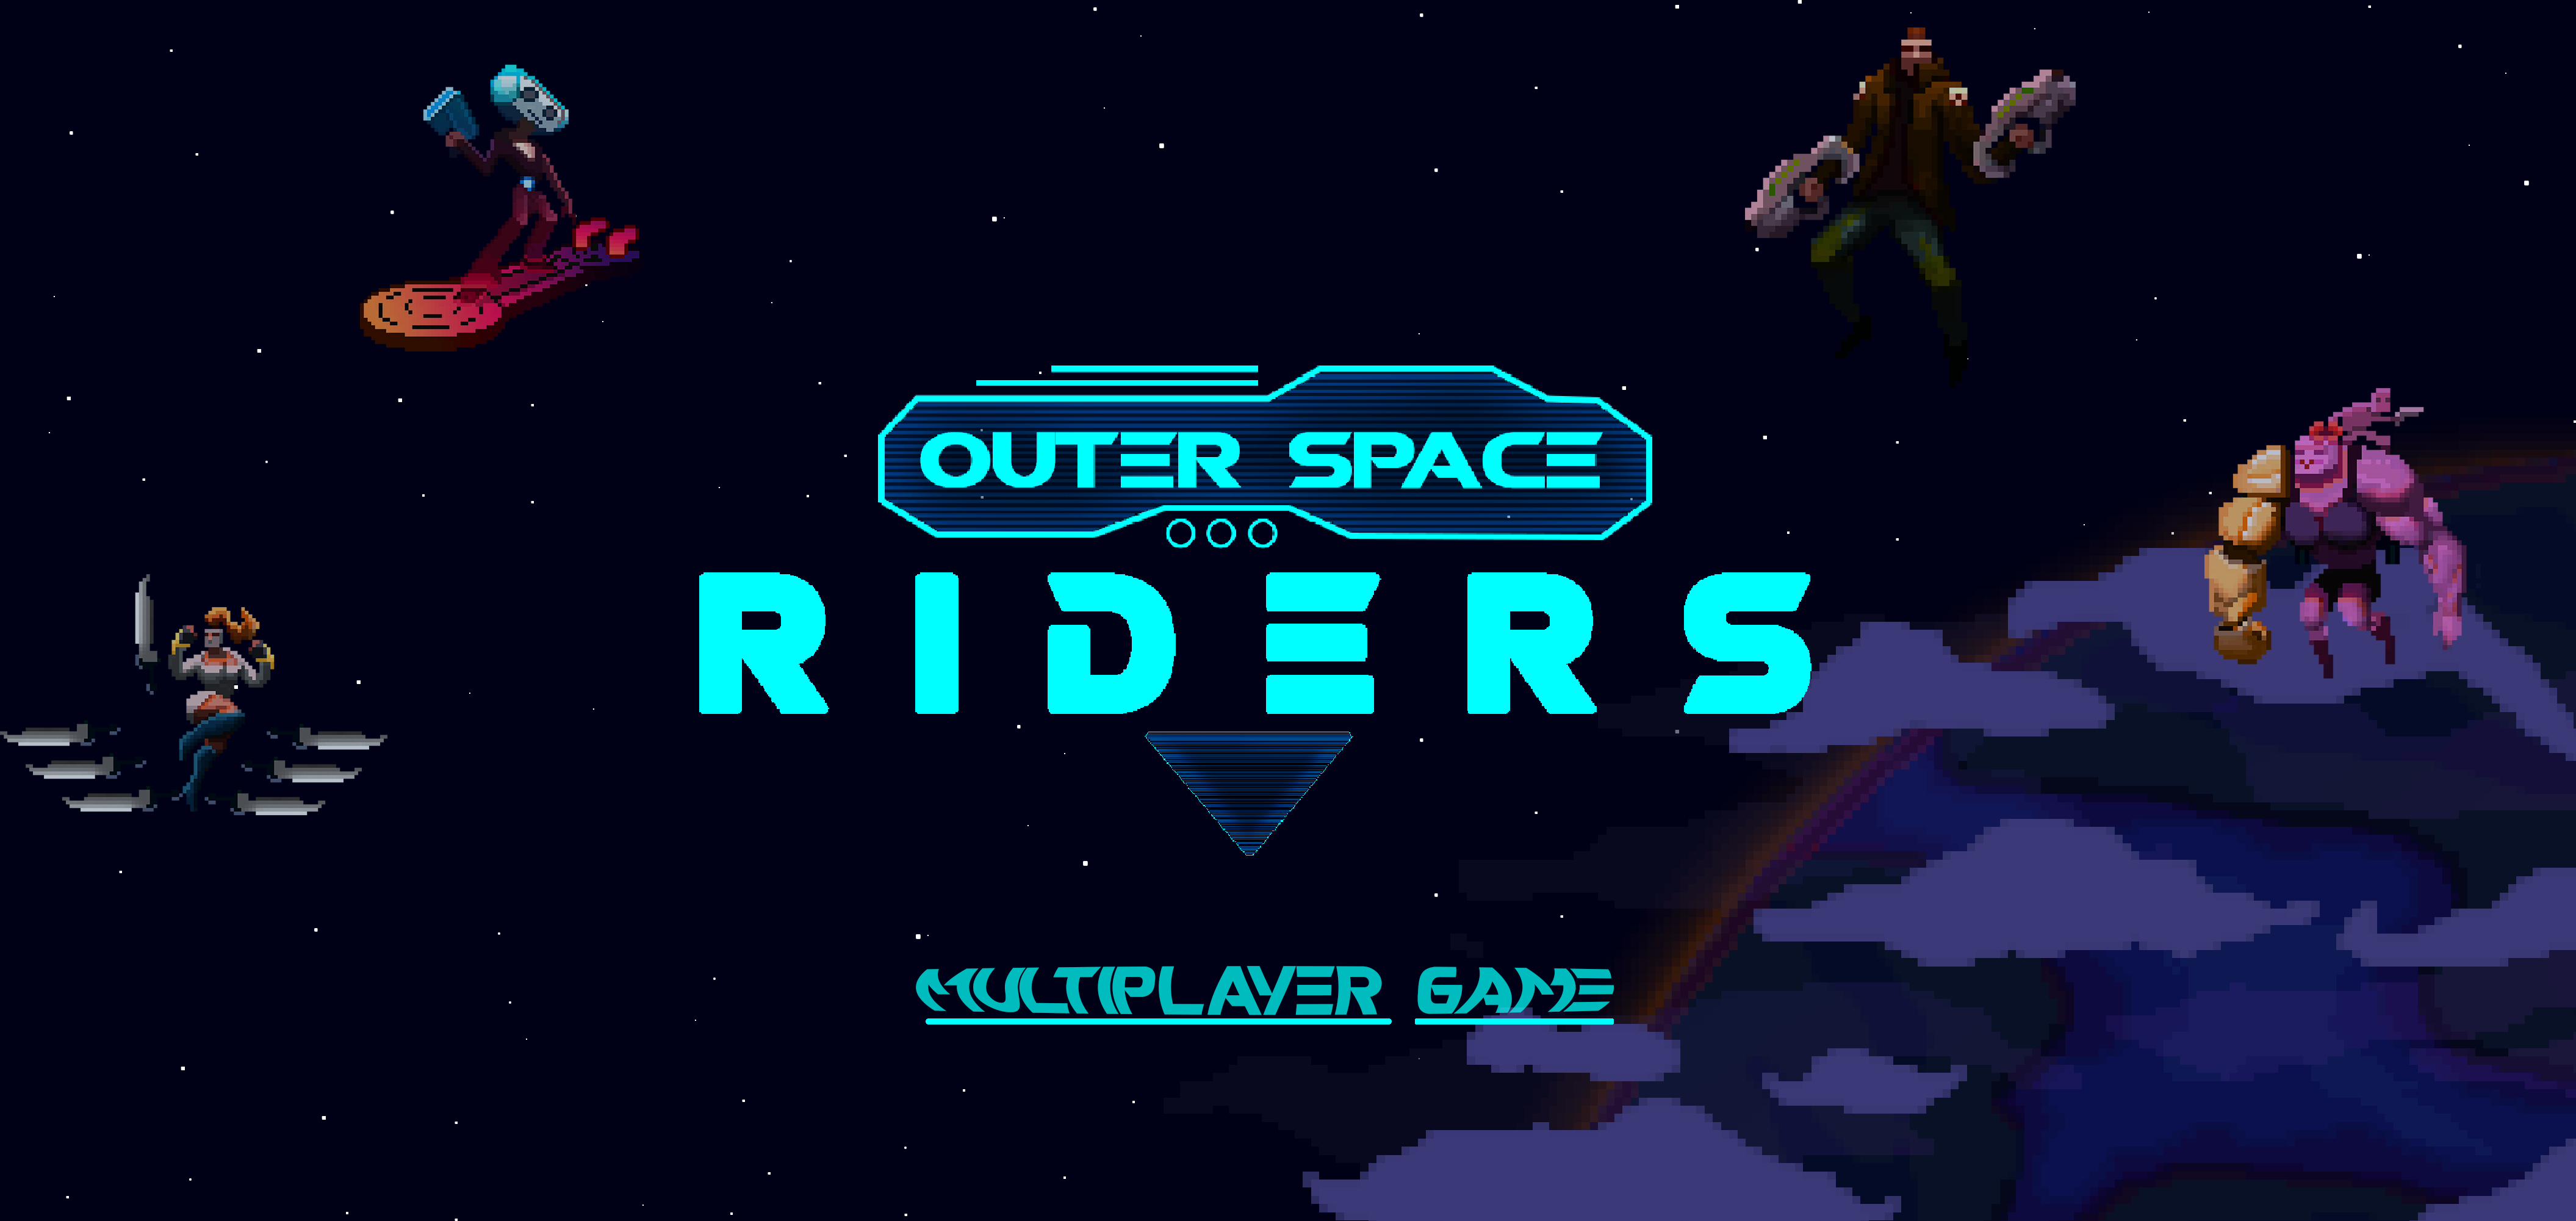 2020.01/ProjetoII/Outer Space Riders